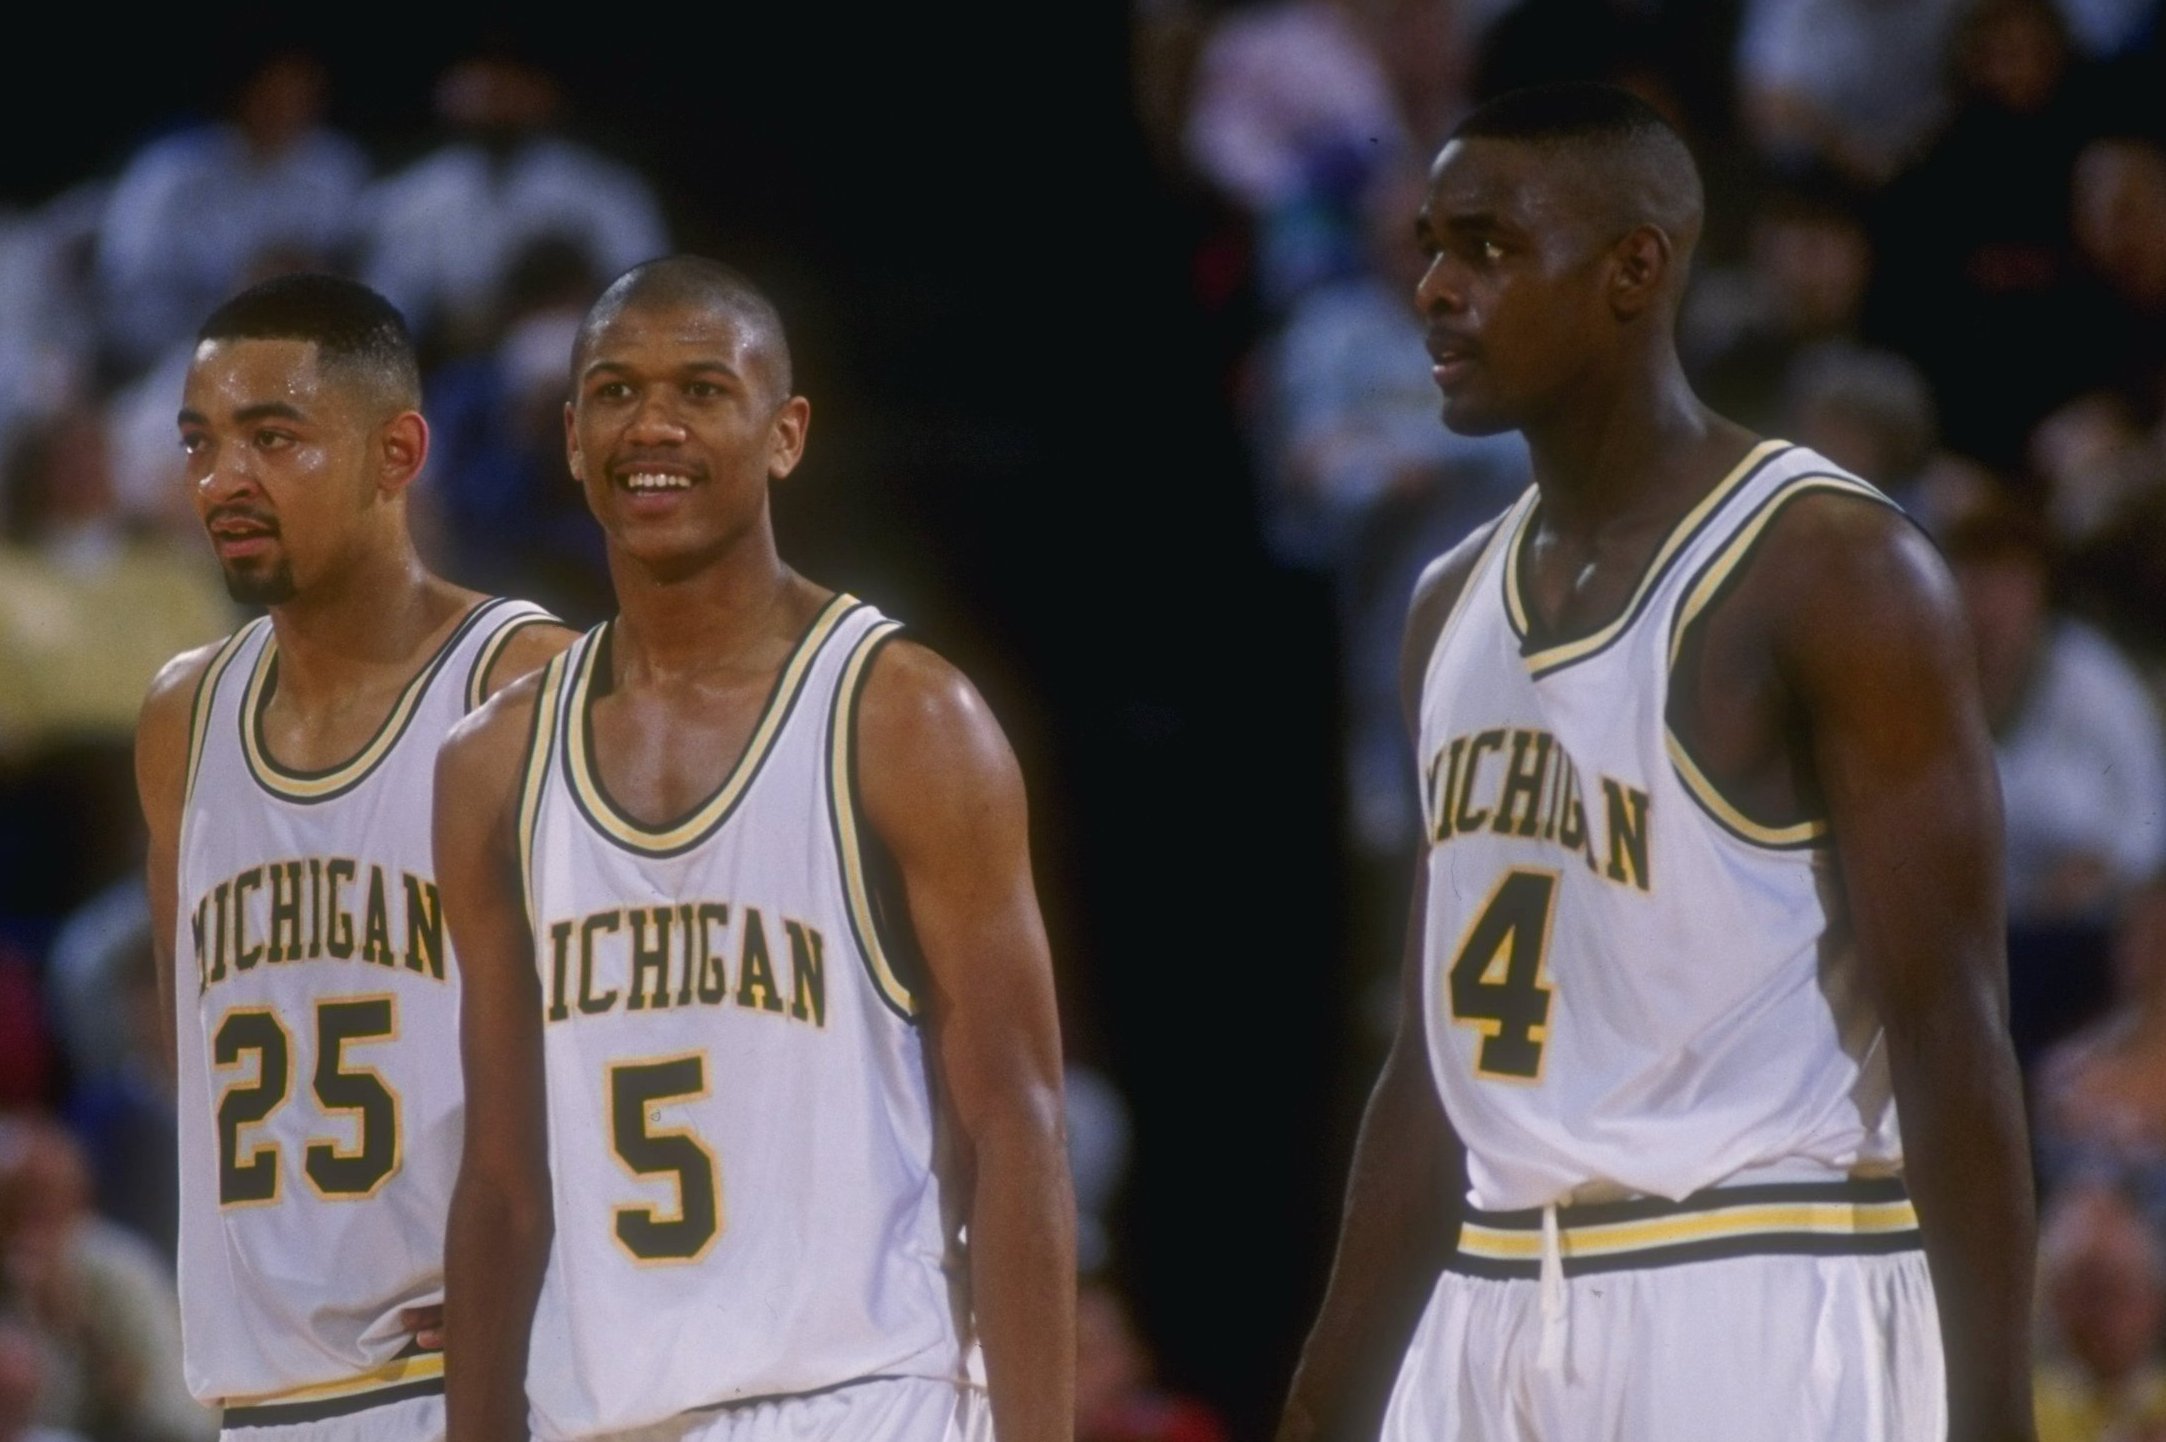 LeBron James and the Fab 5: Where former high school teammates and